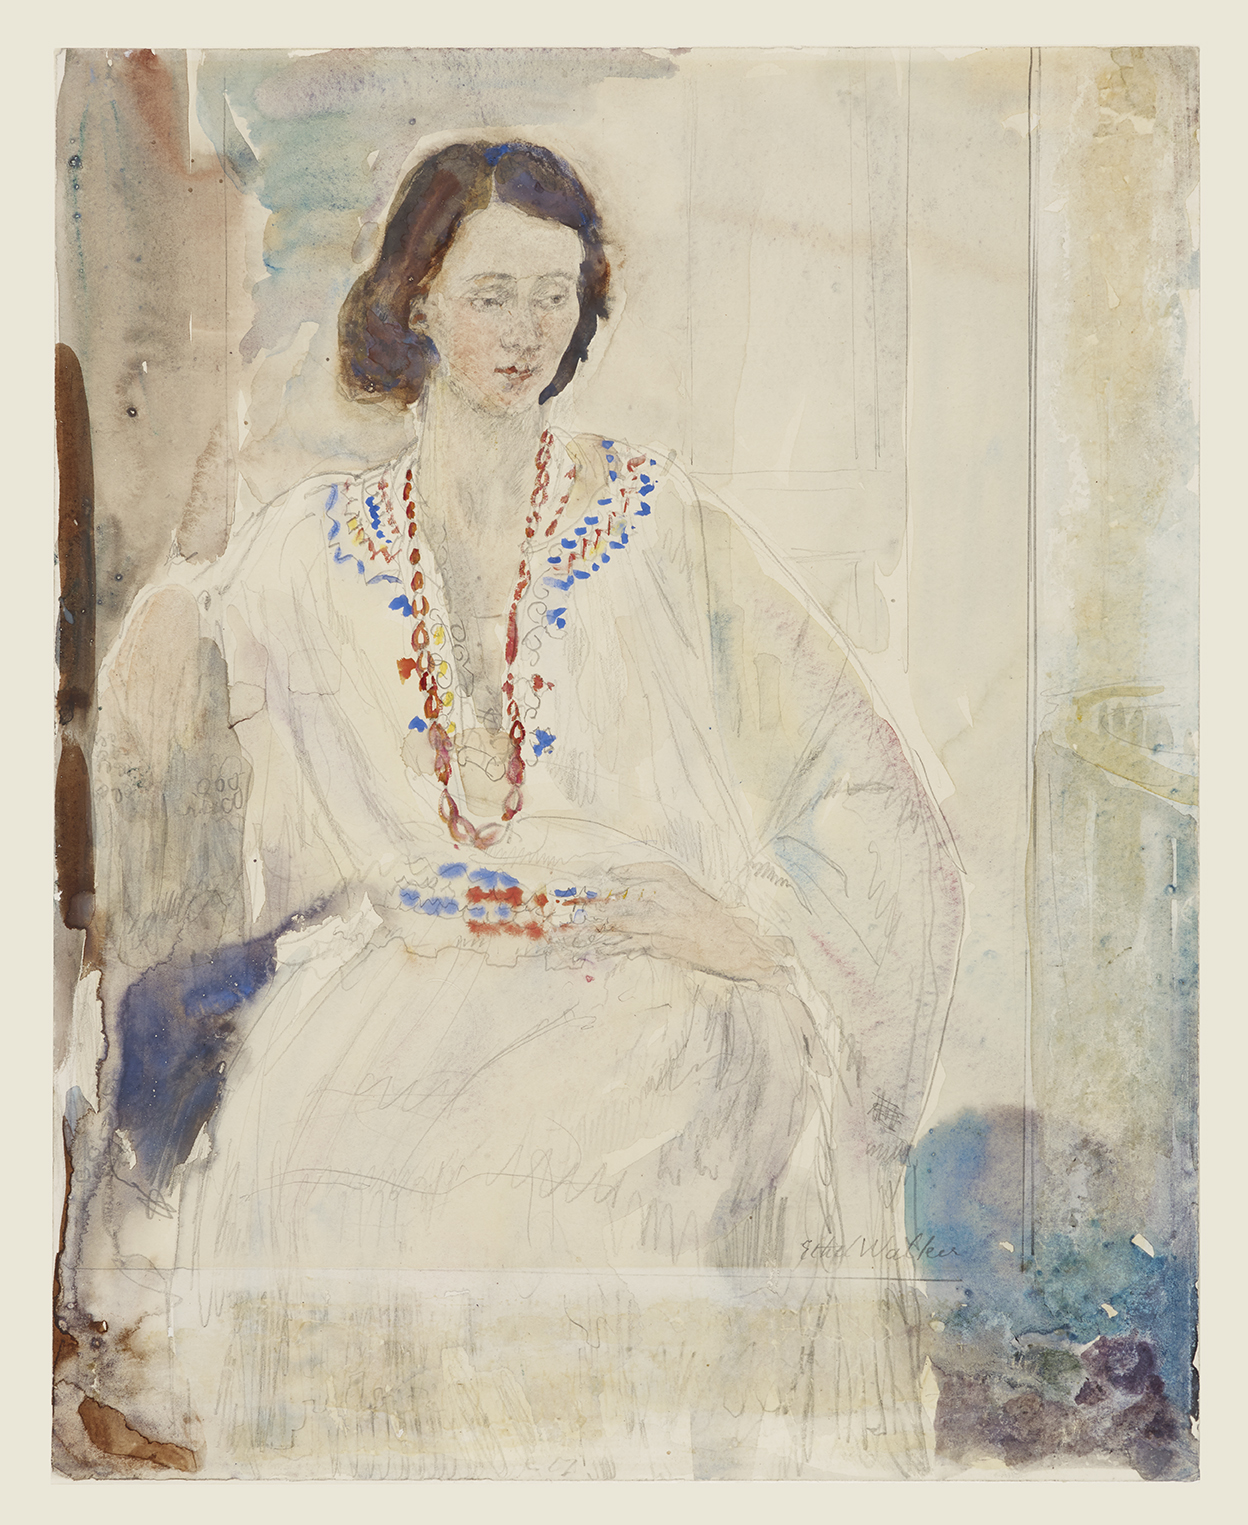 a delicate watercolour painting of a woman in a white dress seated